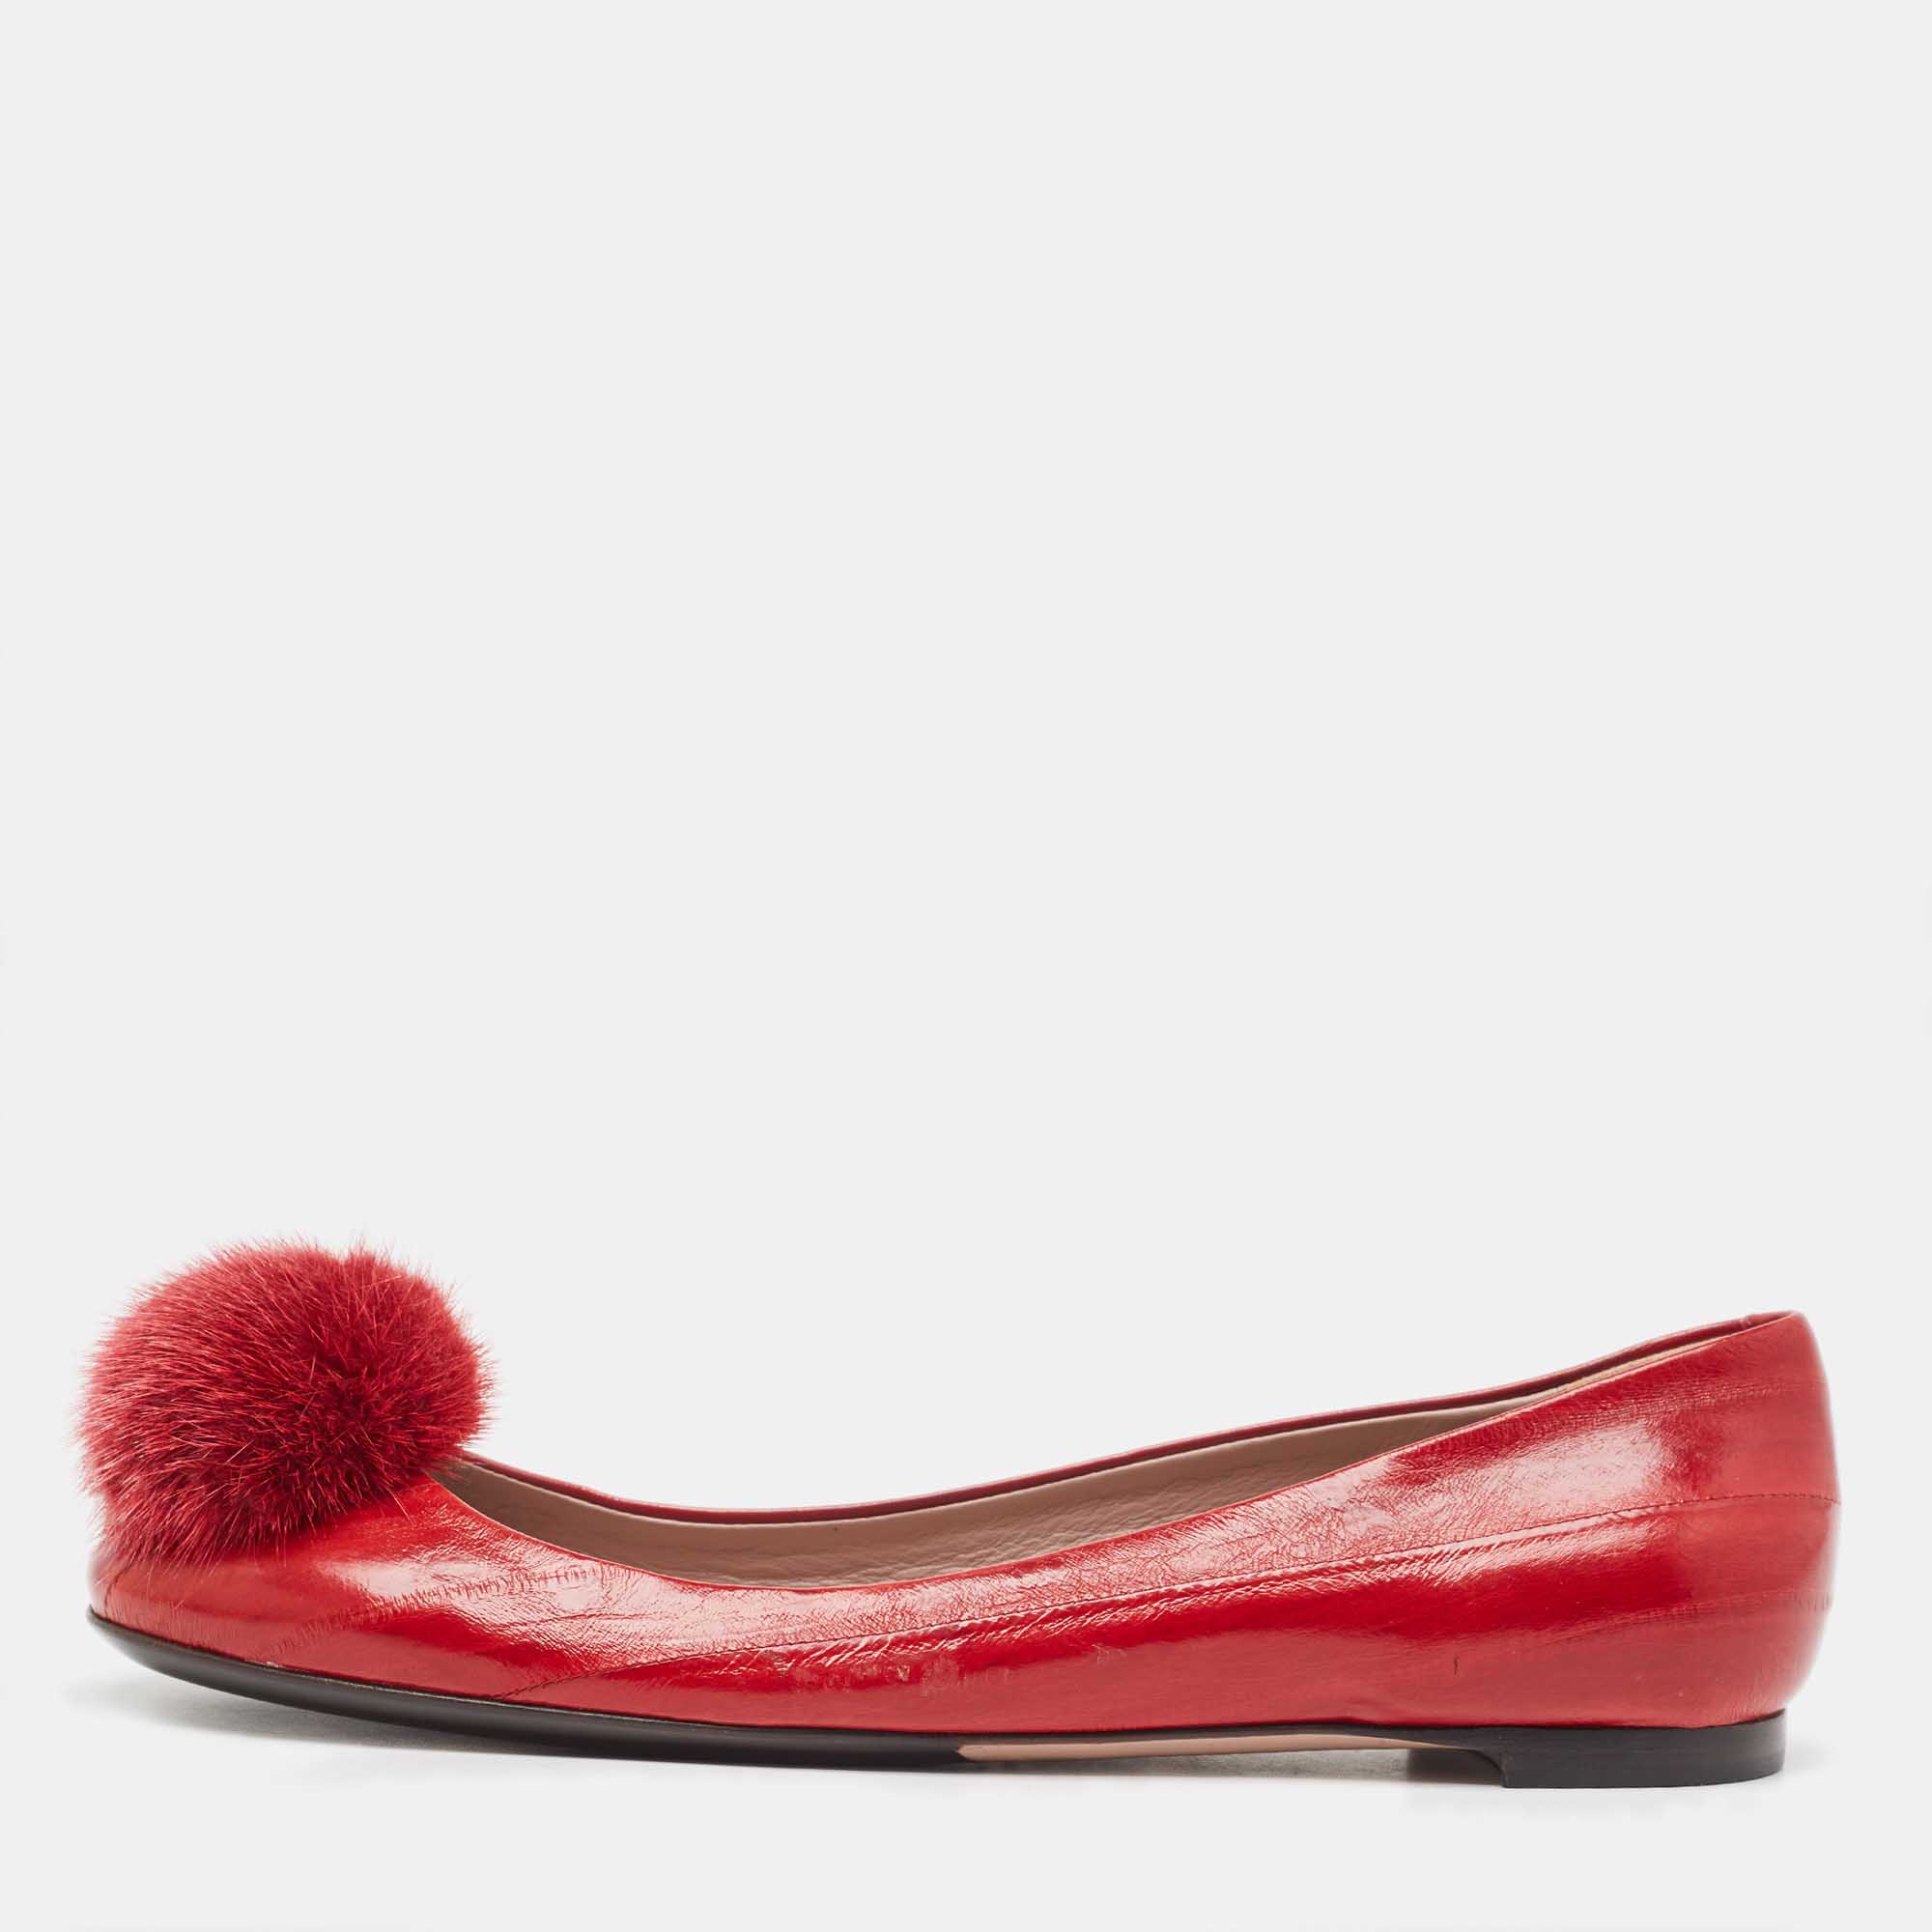 Pre-owned Gucci Red Eel Pom Pom Ballet Flats Size 36